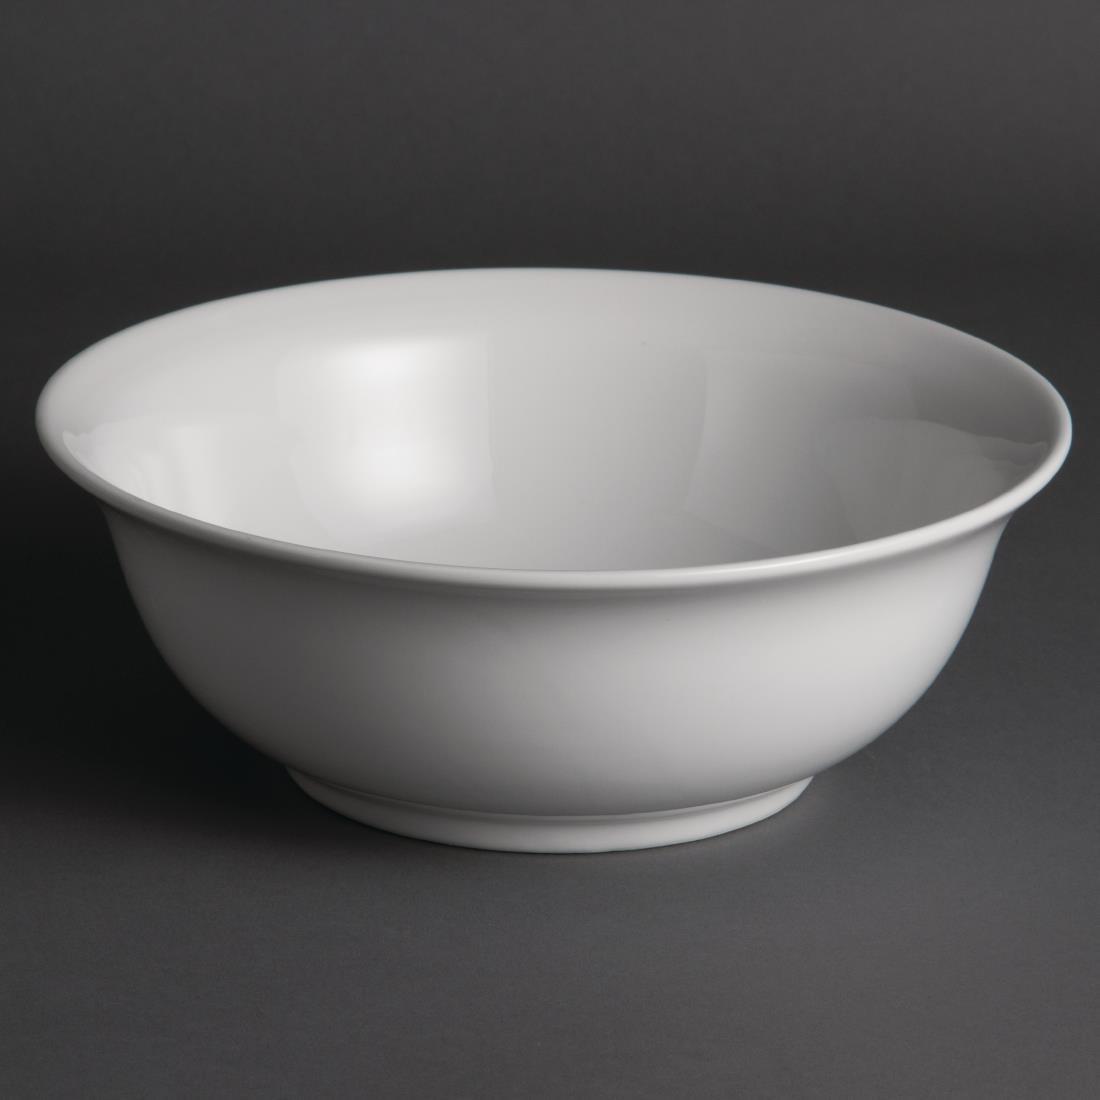 Olympia Whiteware Salad Bowls 235mm (Pack of 6) - W436  - 2